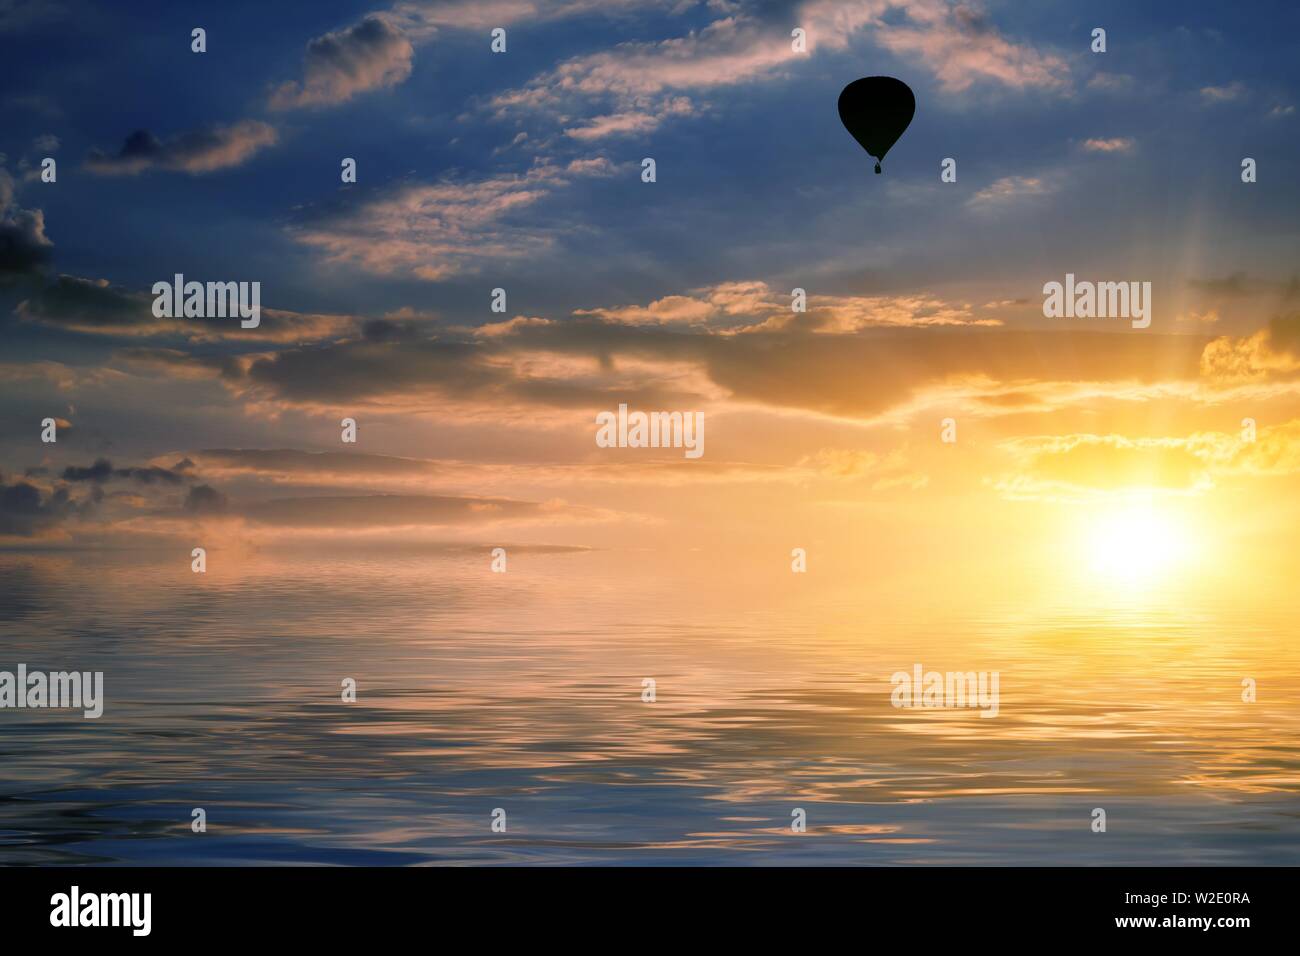 natural landscape with cloudy sky at sunset and air balloon reflected in water Stock Photo